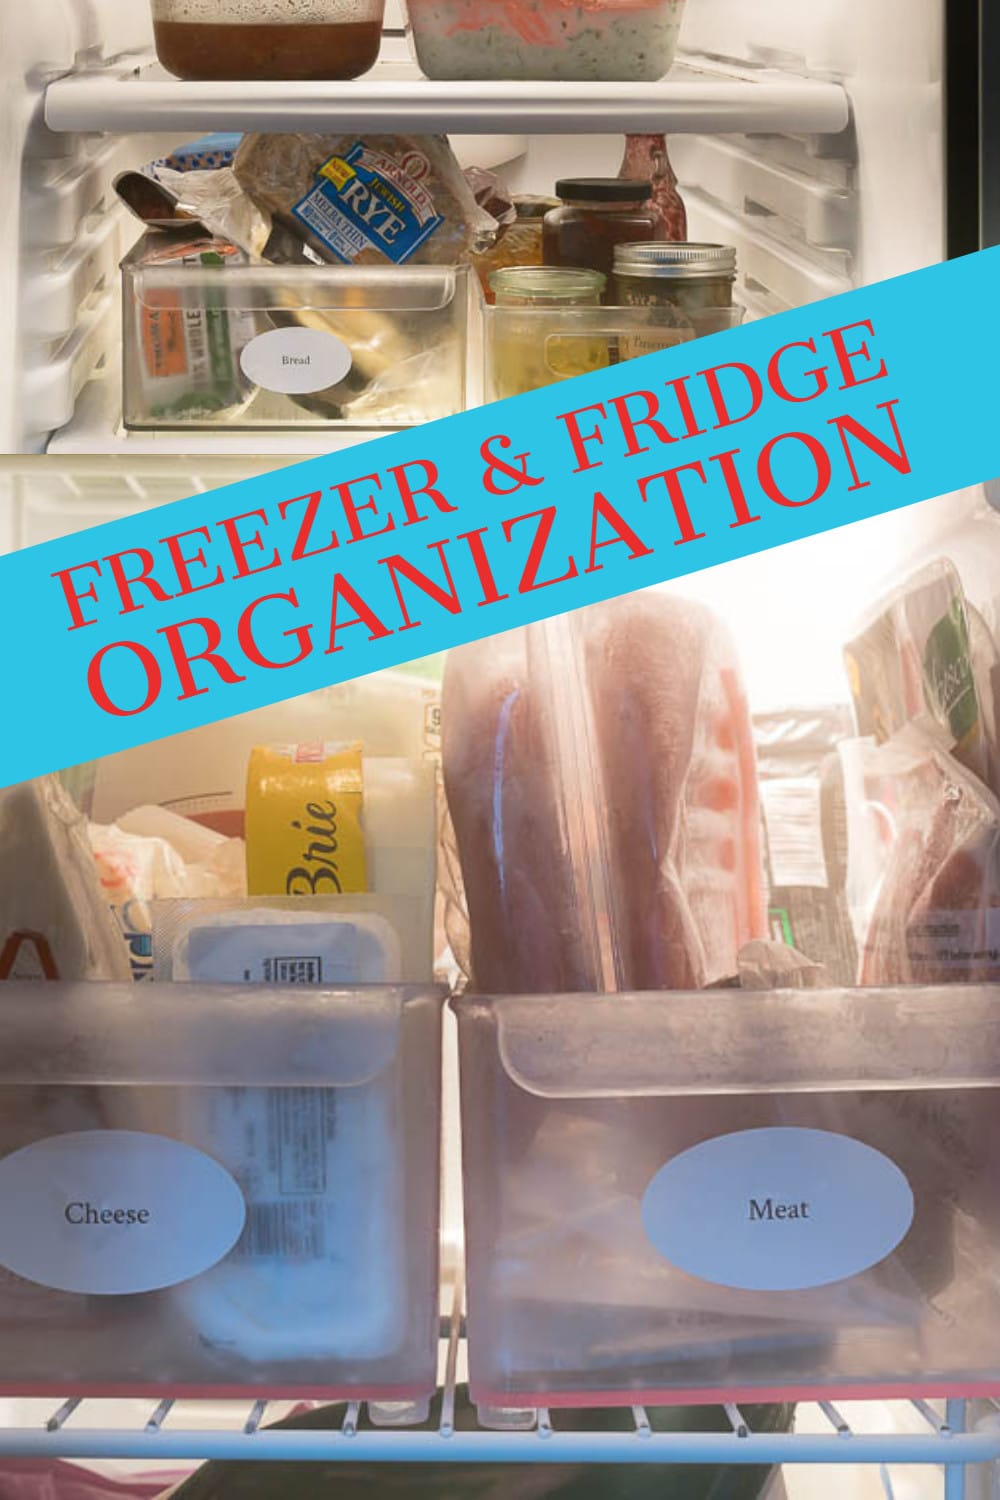 Images of bins in freezer and refrigerator for Freezer and Refrigerator Organization